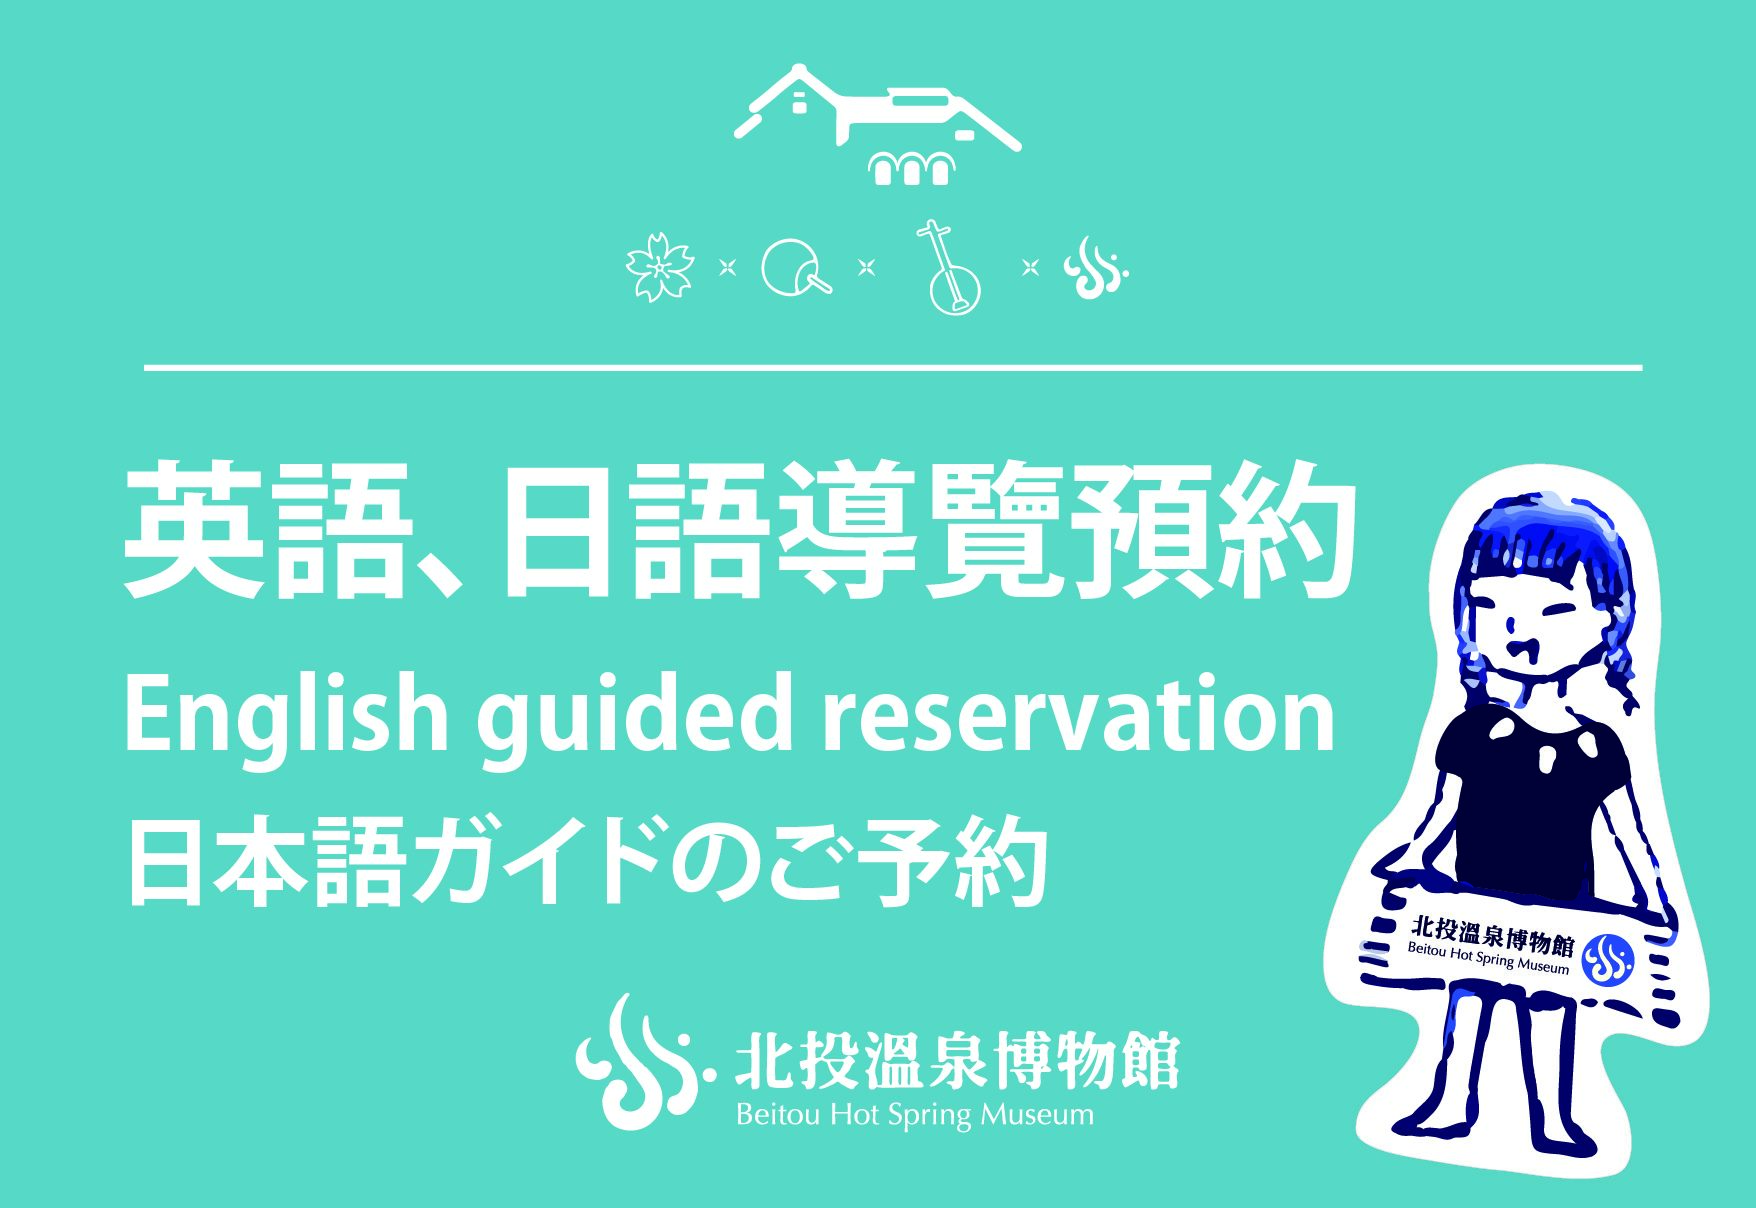 English guided reservation